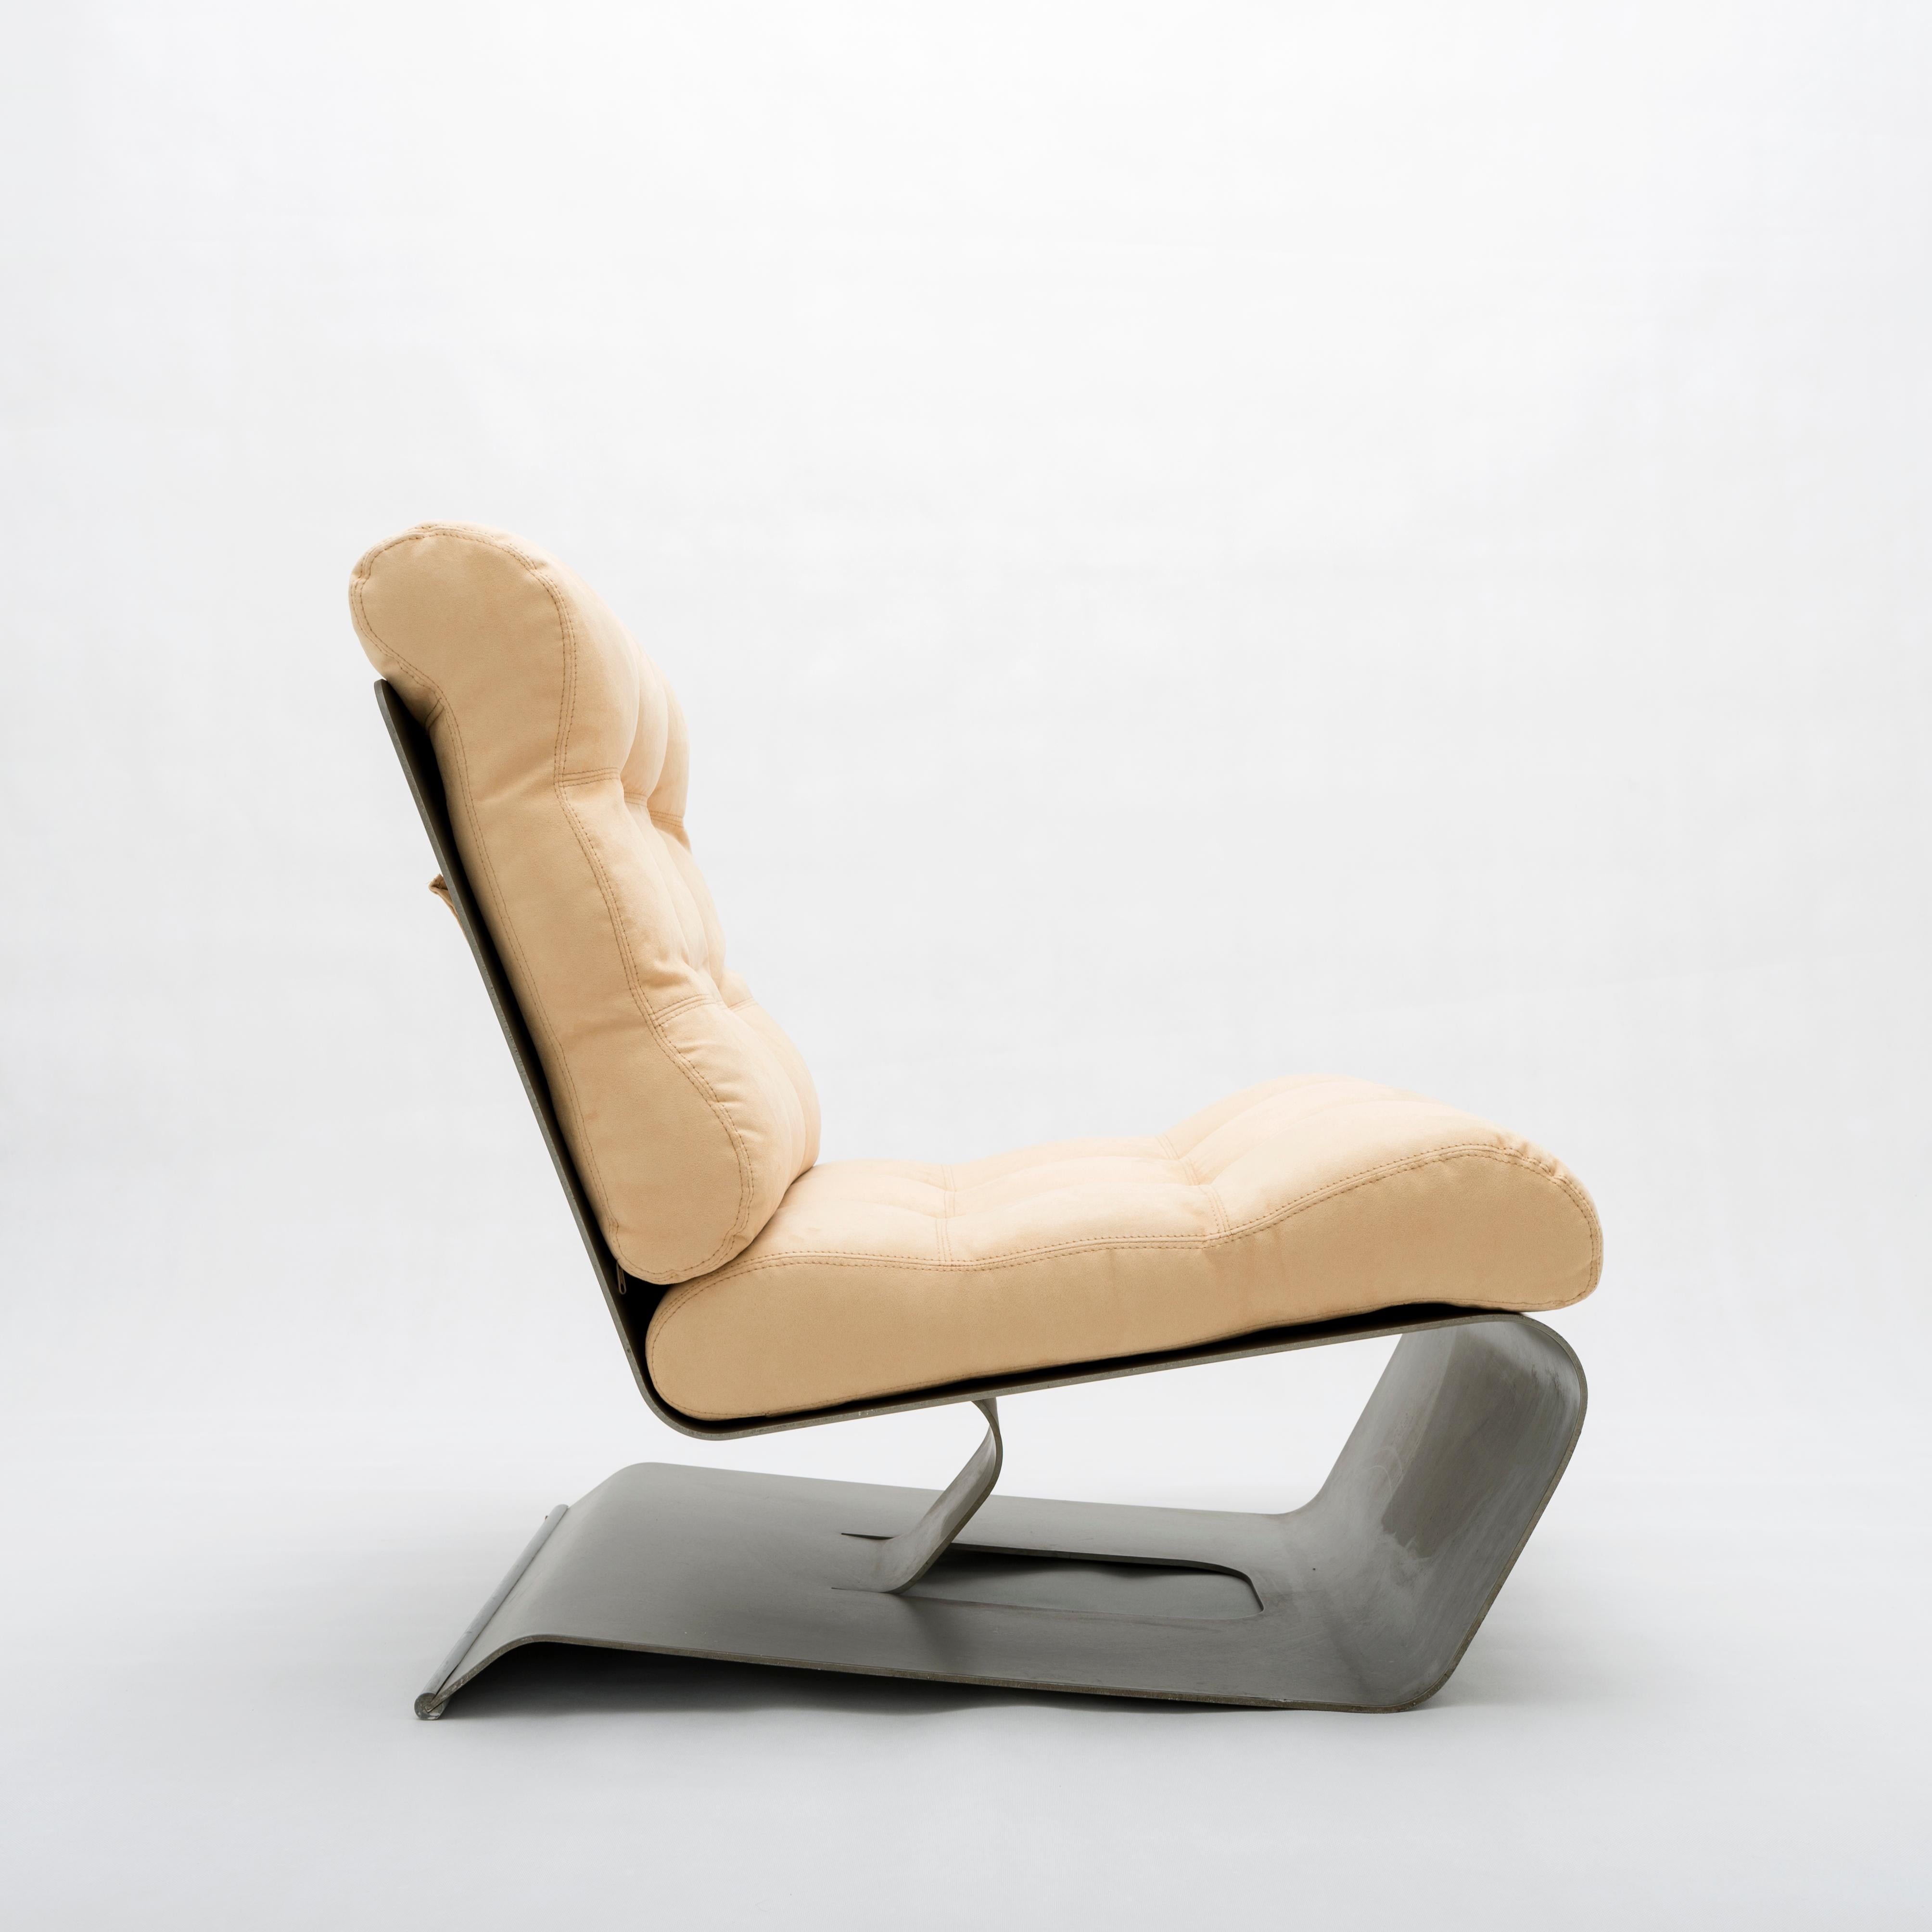 Walter & Moretti lounge chair
Aluminum, suede upholstery
Italy, 1970s.